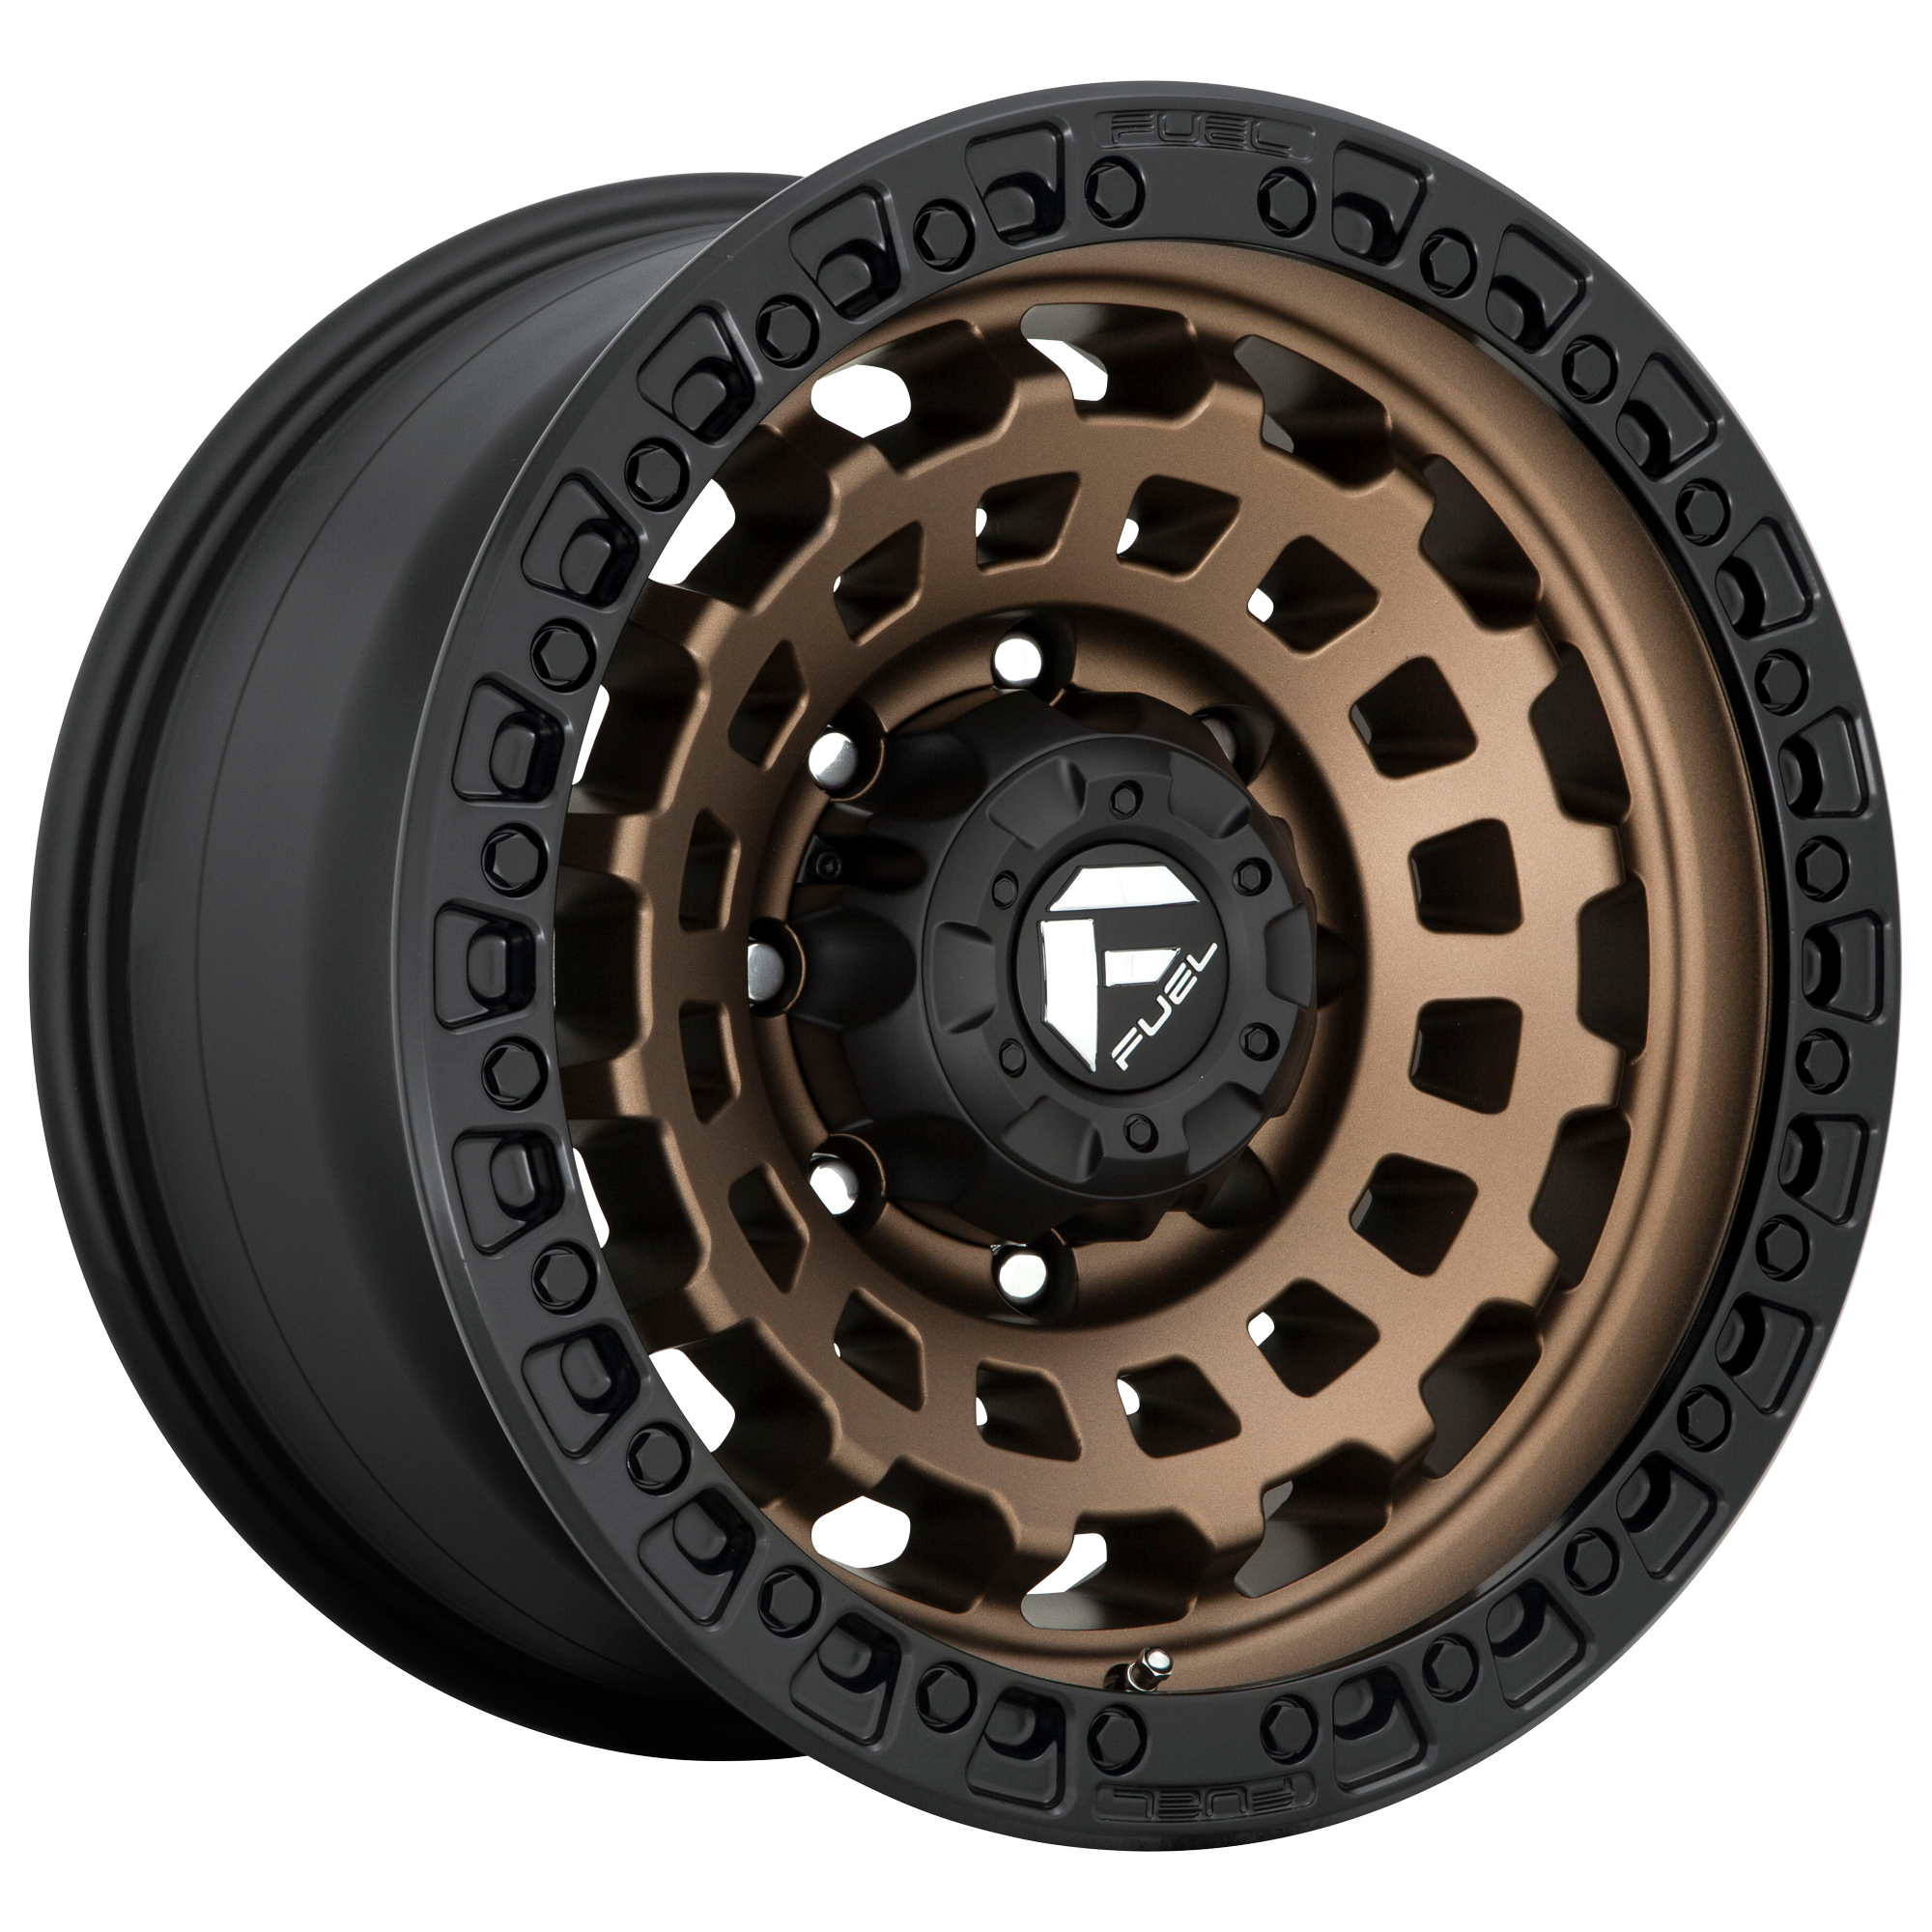 ZEPHYR 20x9 8x180.00 MATTE BRONZE BLACK BEAD RING (1 mm) - Tires and Engine Performance